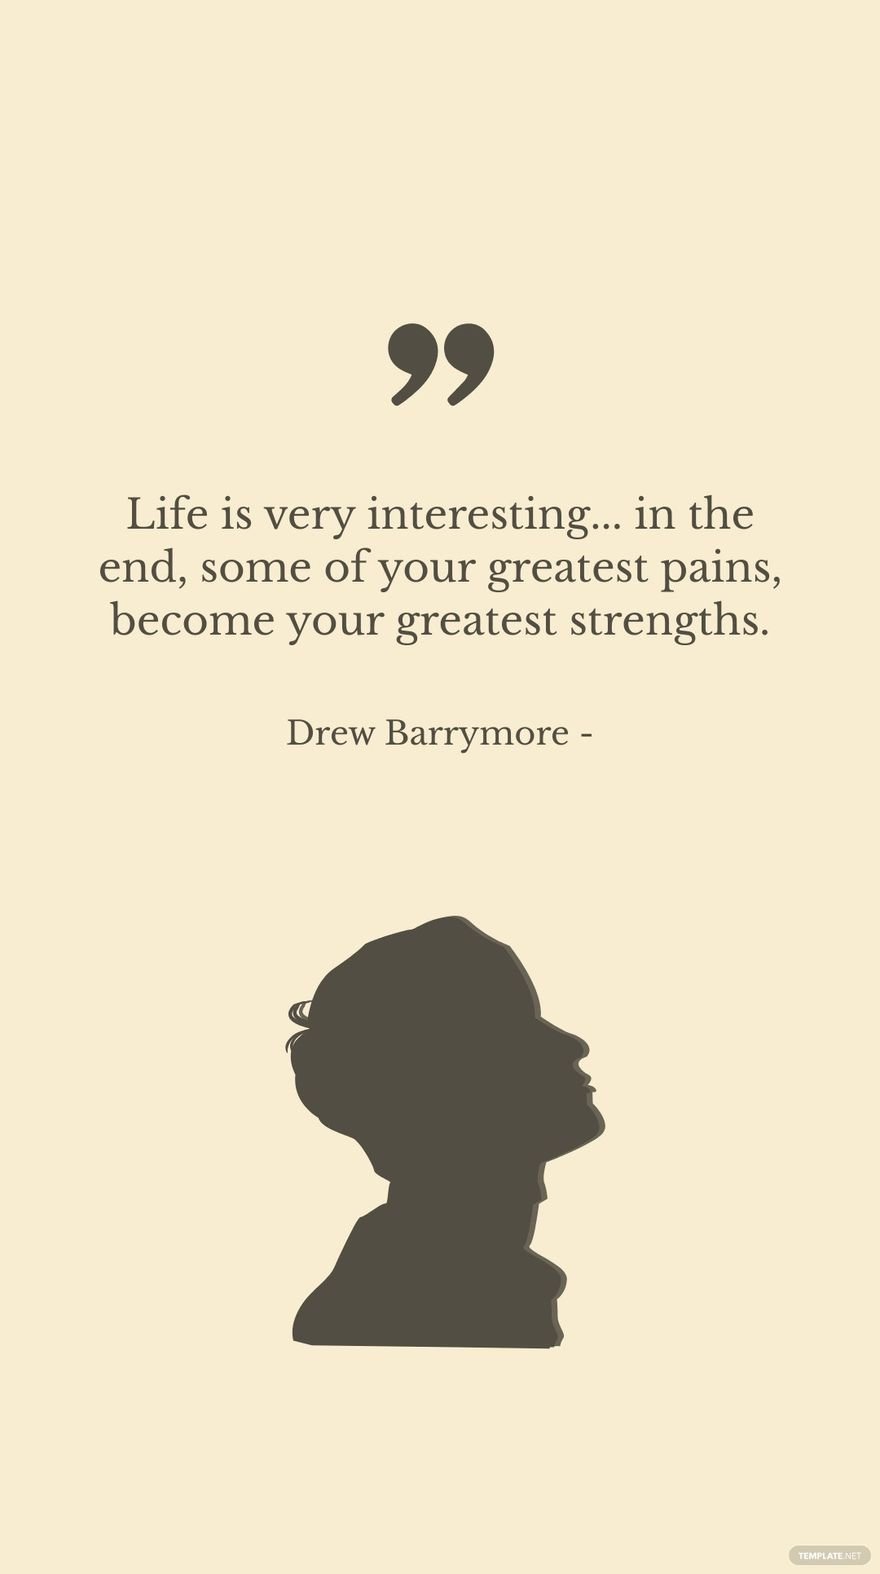 Drew Barrymore - Life is very interesting... in the end, some of your greatest pains, become your greatest strengths.